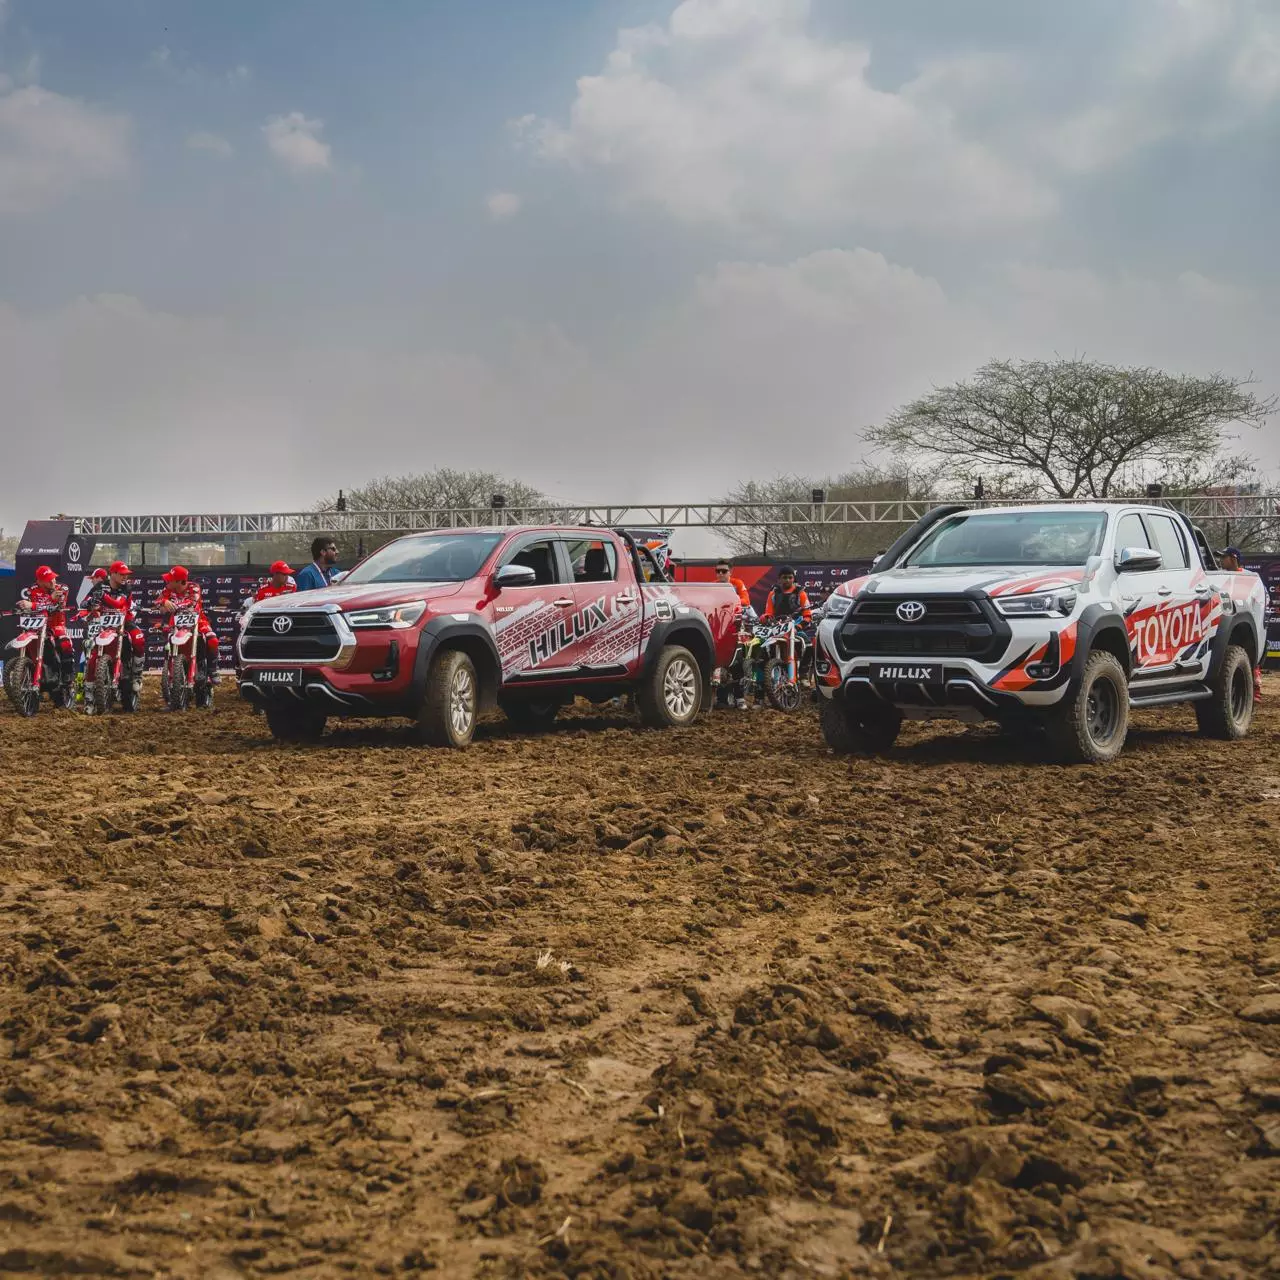 Dirt Bike Race in Bengaluru: Toyota Hilux Sparks Thrill in Indian Supercross Racing League